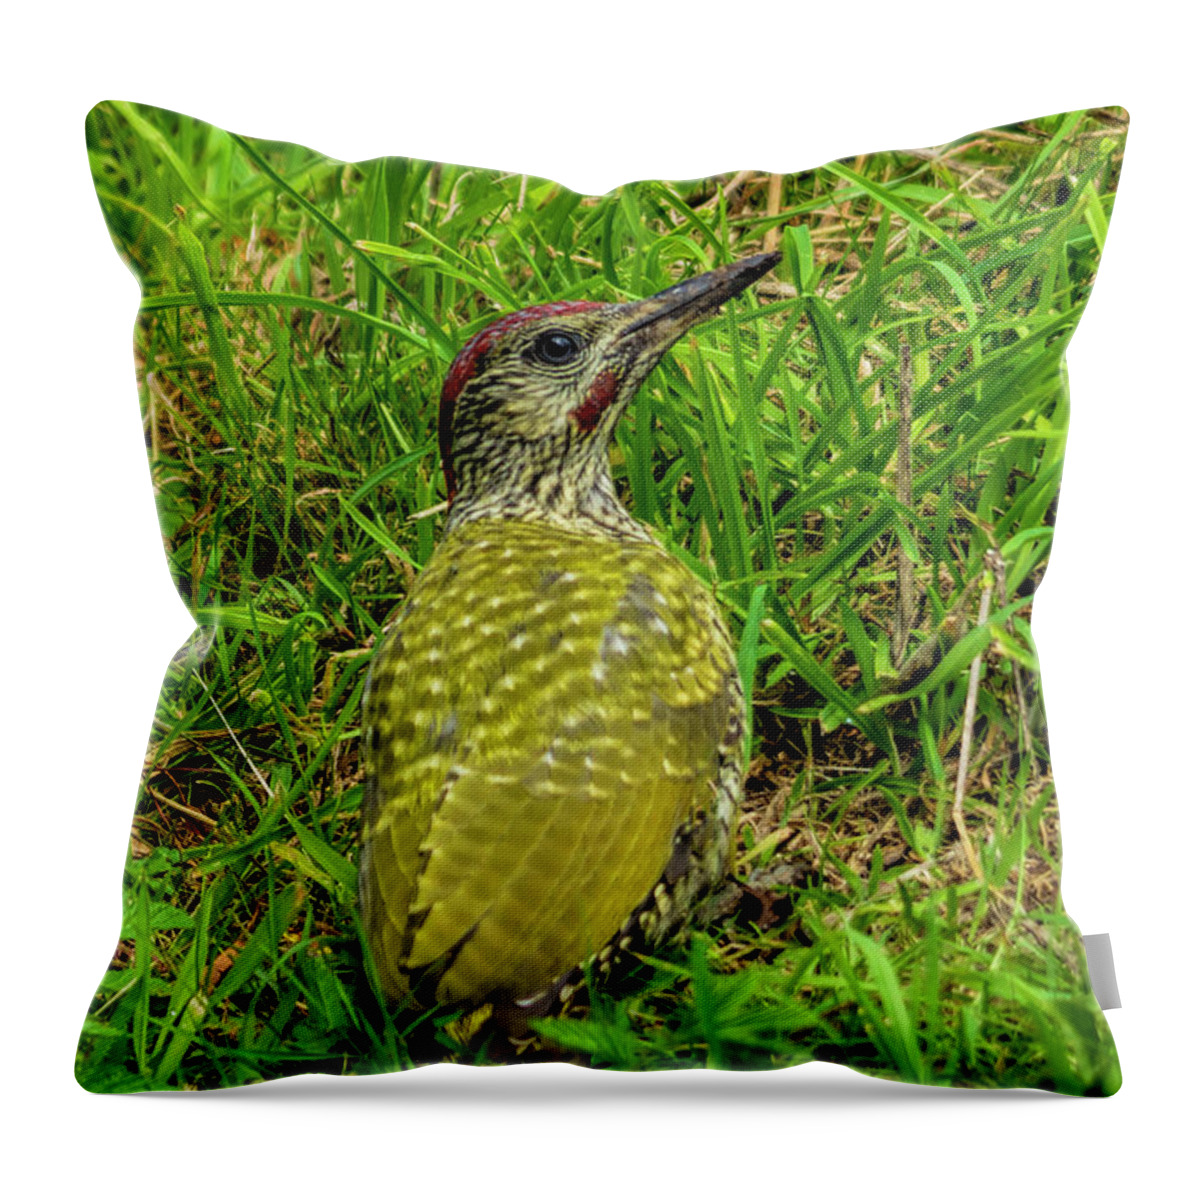 Woodpecker Throw Pillow featuring the photograph Green Woodpecker by Steev Stamford